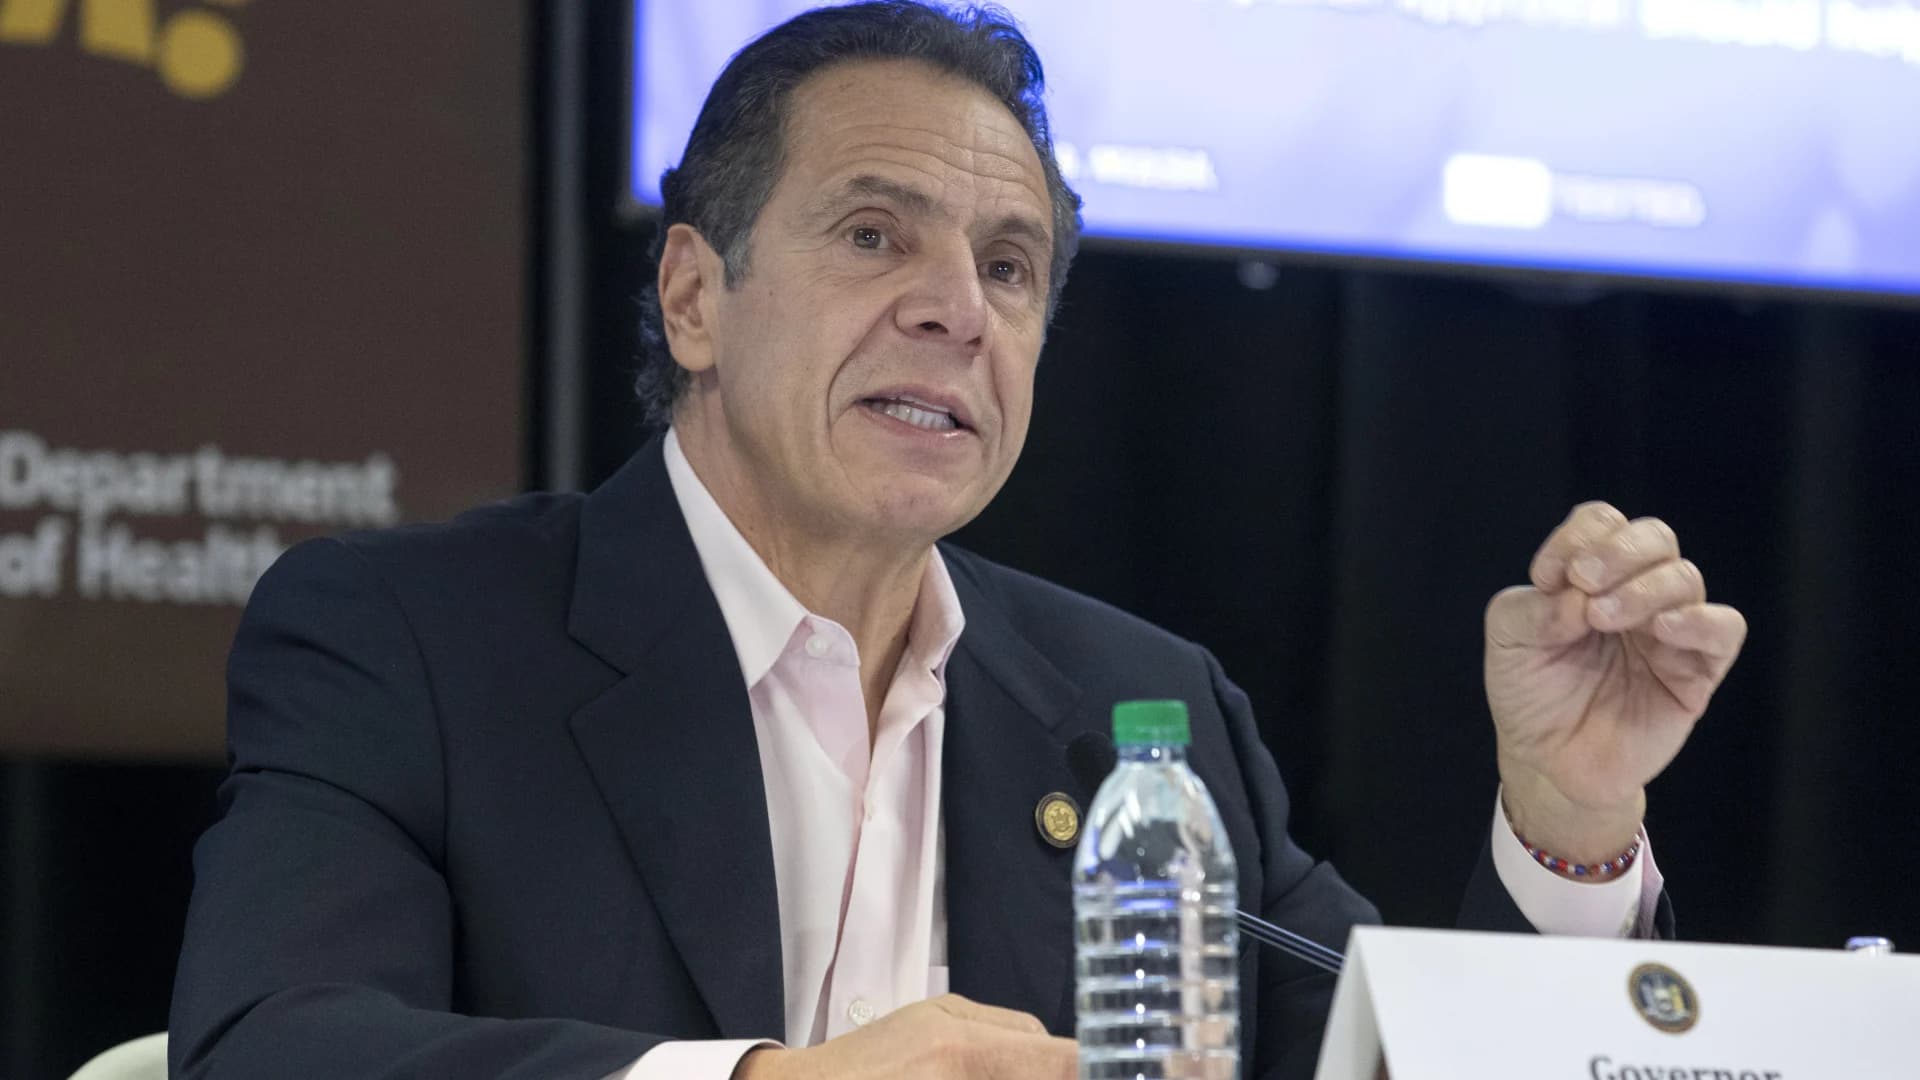 Another ex-aide calls Cuomo’s office conduct inappropriate